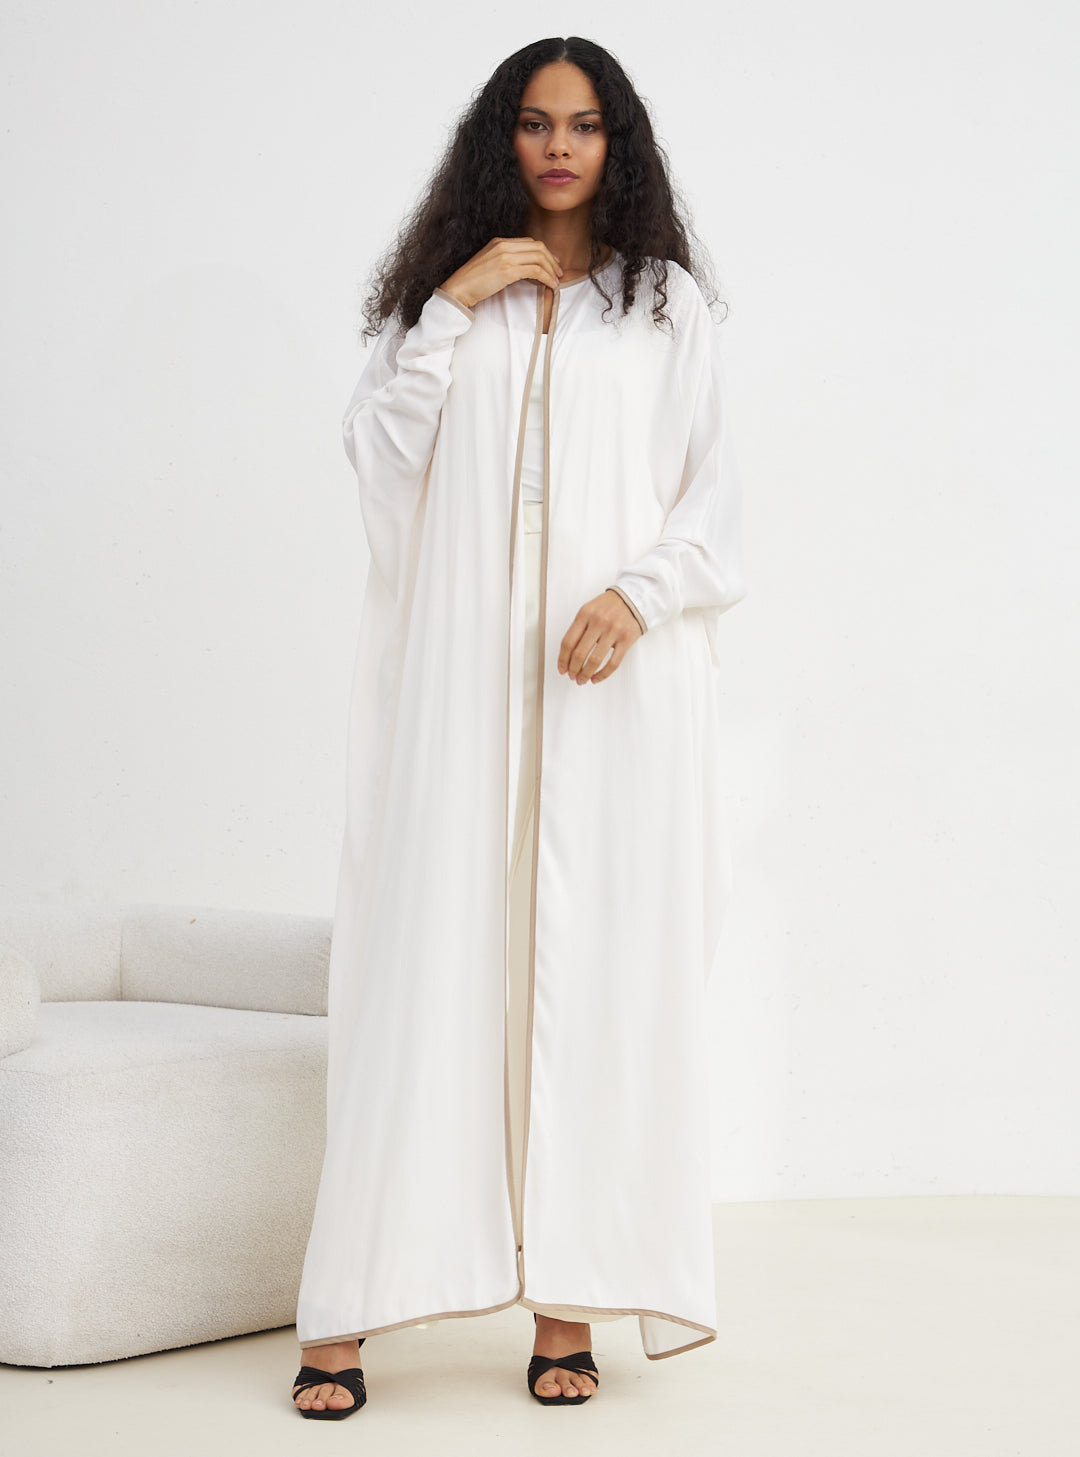 Abaya Offwhite With Light Brown Piping